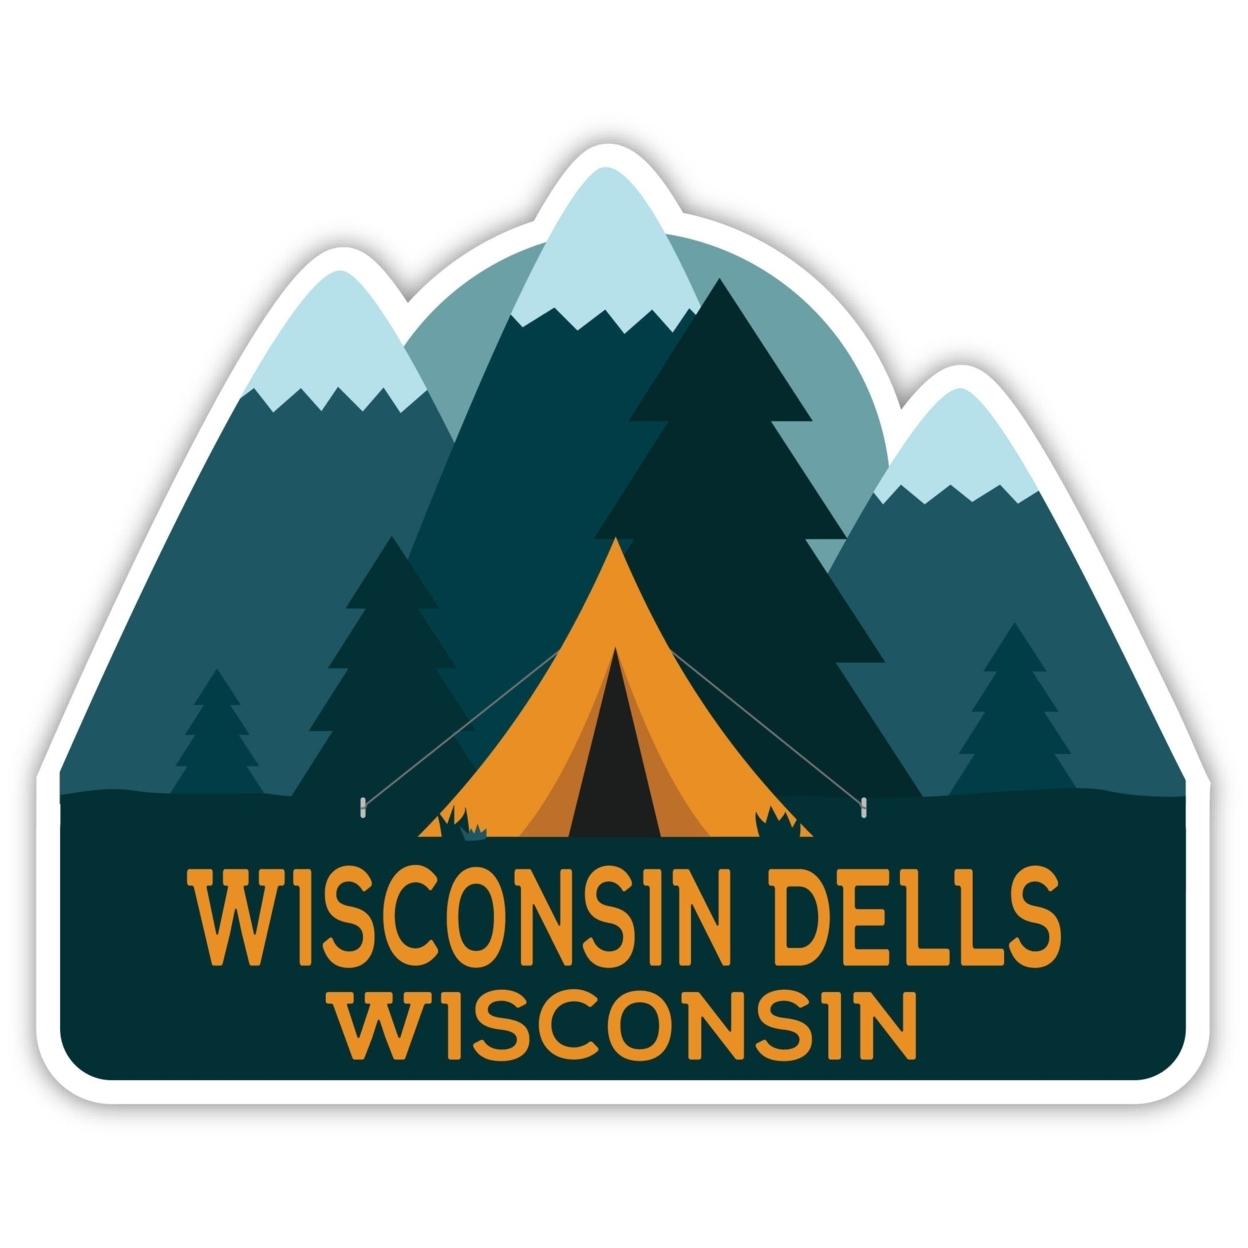 Wisconsin Dells Wisconsin Souvenir Decorative Stickers (Choose Theme And Size) - Single Unit, 4-Inch, Tent